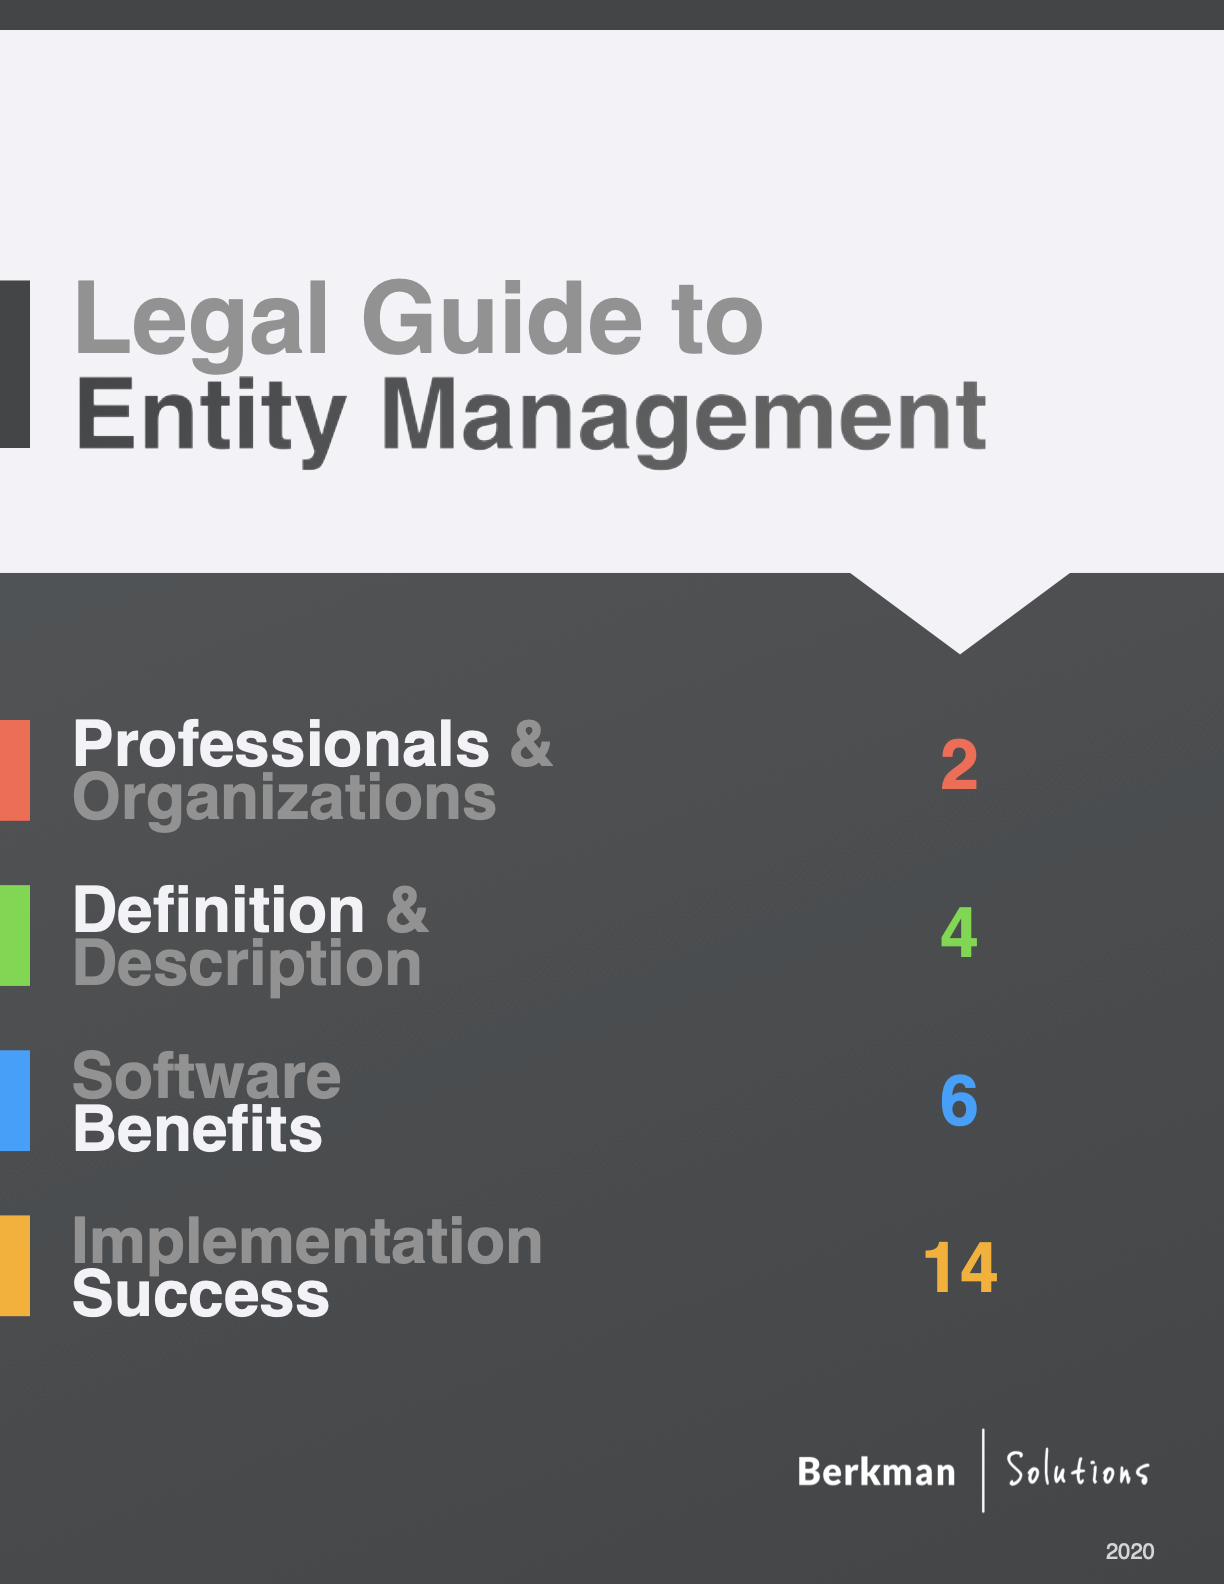 Legal Guide to Entity Management Thumbnail